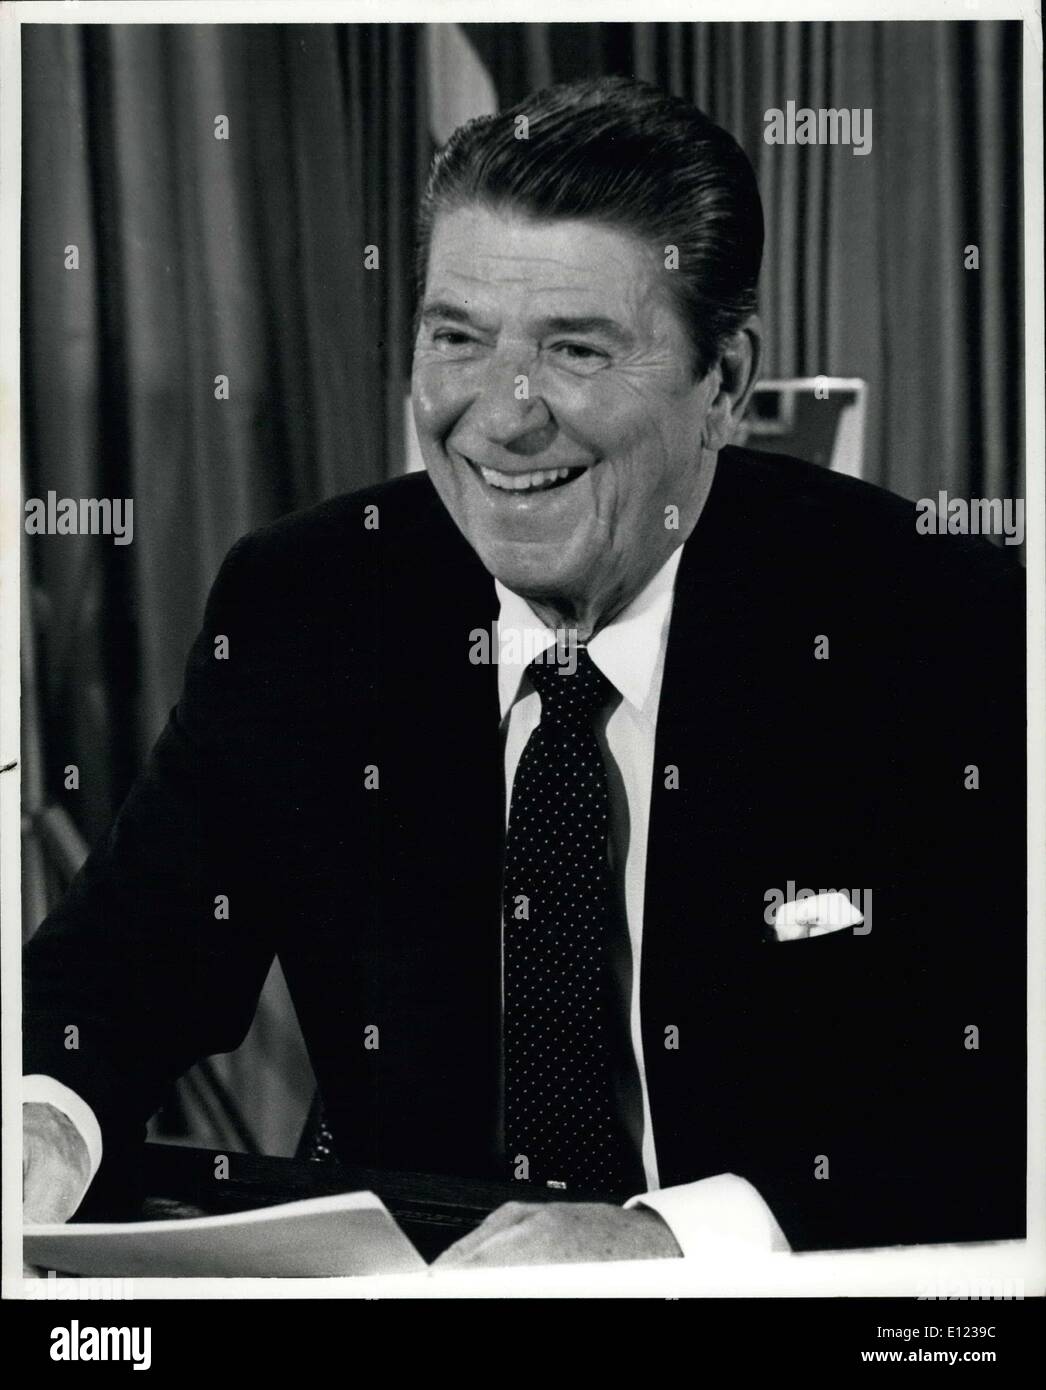 Aug. 16, 1982 - We Really Need It Washington, D.C.: President Ronald Reagan Is Shown As He Completed A Nationwide TV Talk From The Oval Office Of The White House Appealing For Support For A 98 Billion Dollar Tax Increase, The Highest In Peace Time History. Stock Photo